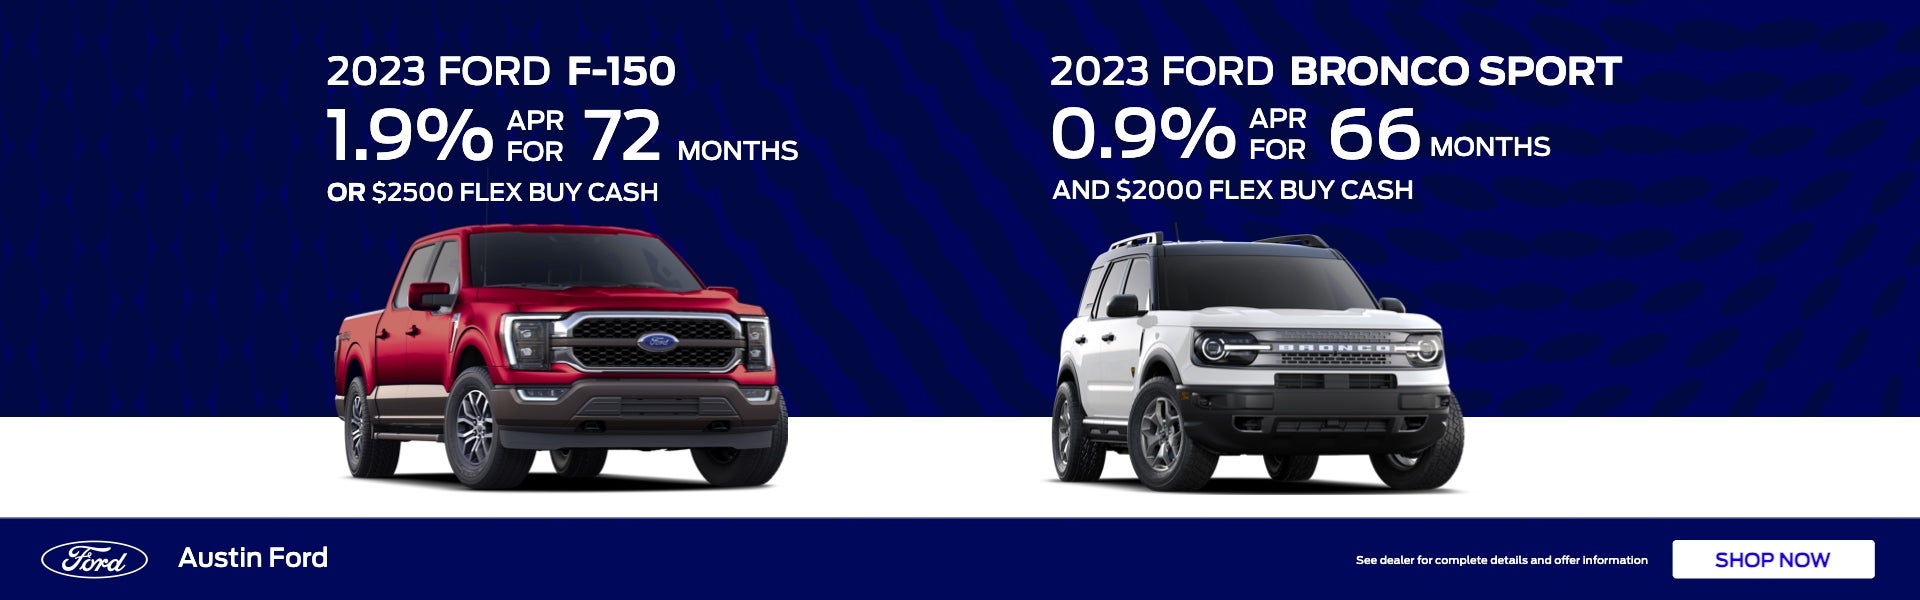 New APR deals on 2023 F-150 and Bronco Sport